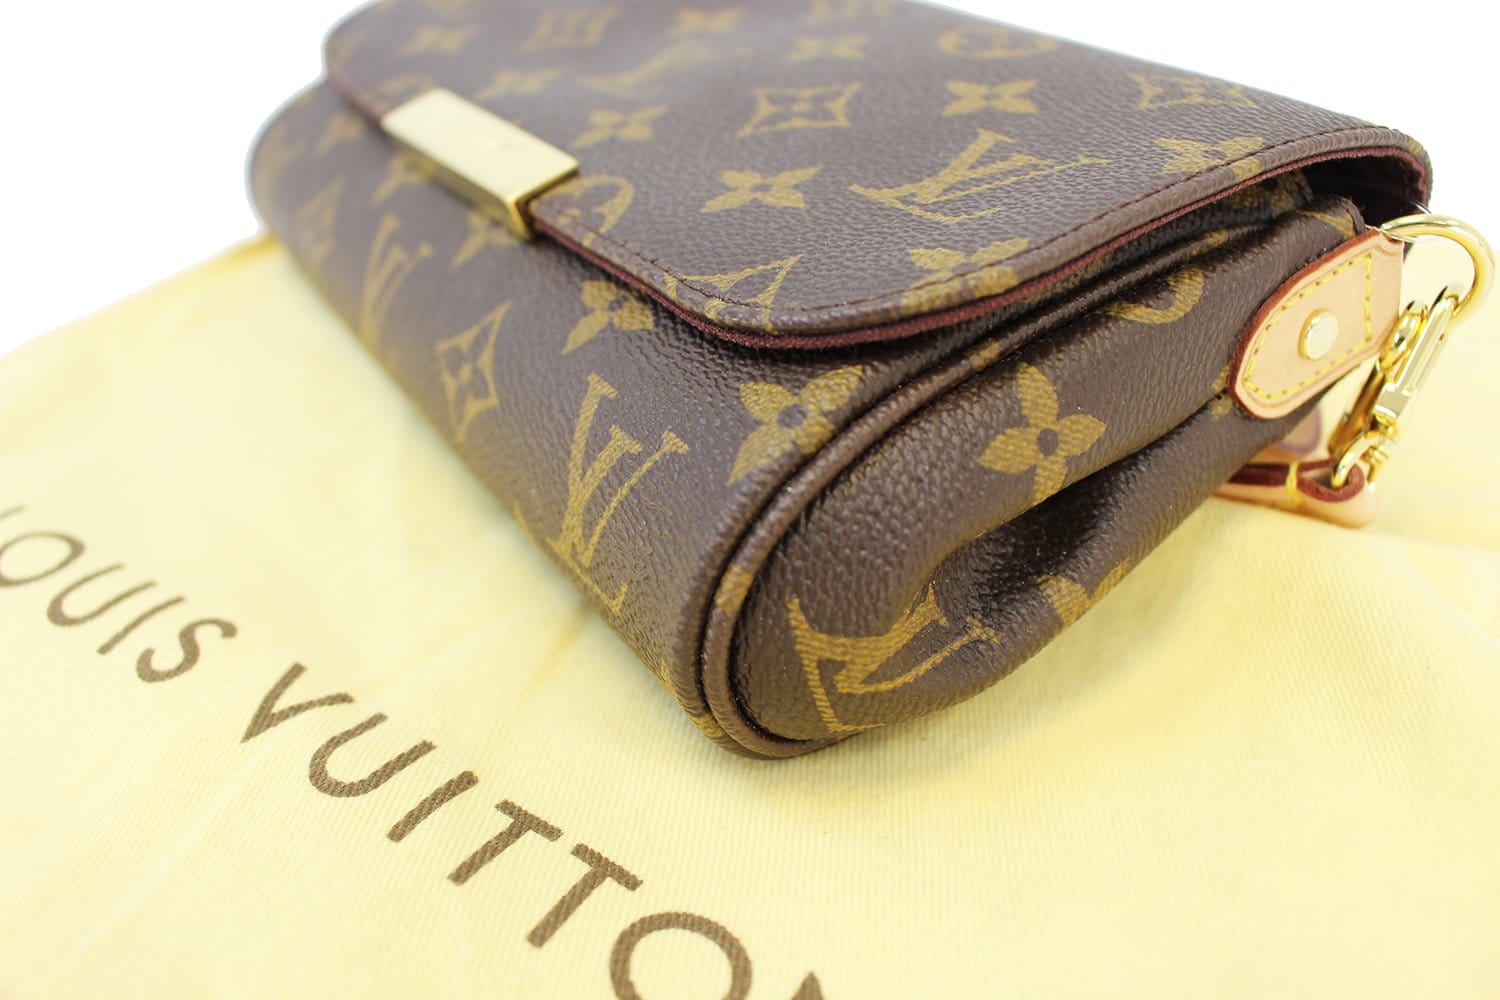 louis vuitton shoulder and crossbody olive green｜TikTok Search